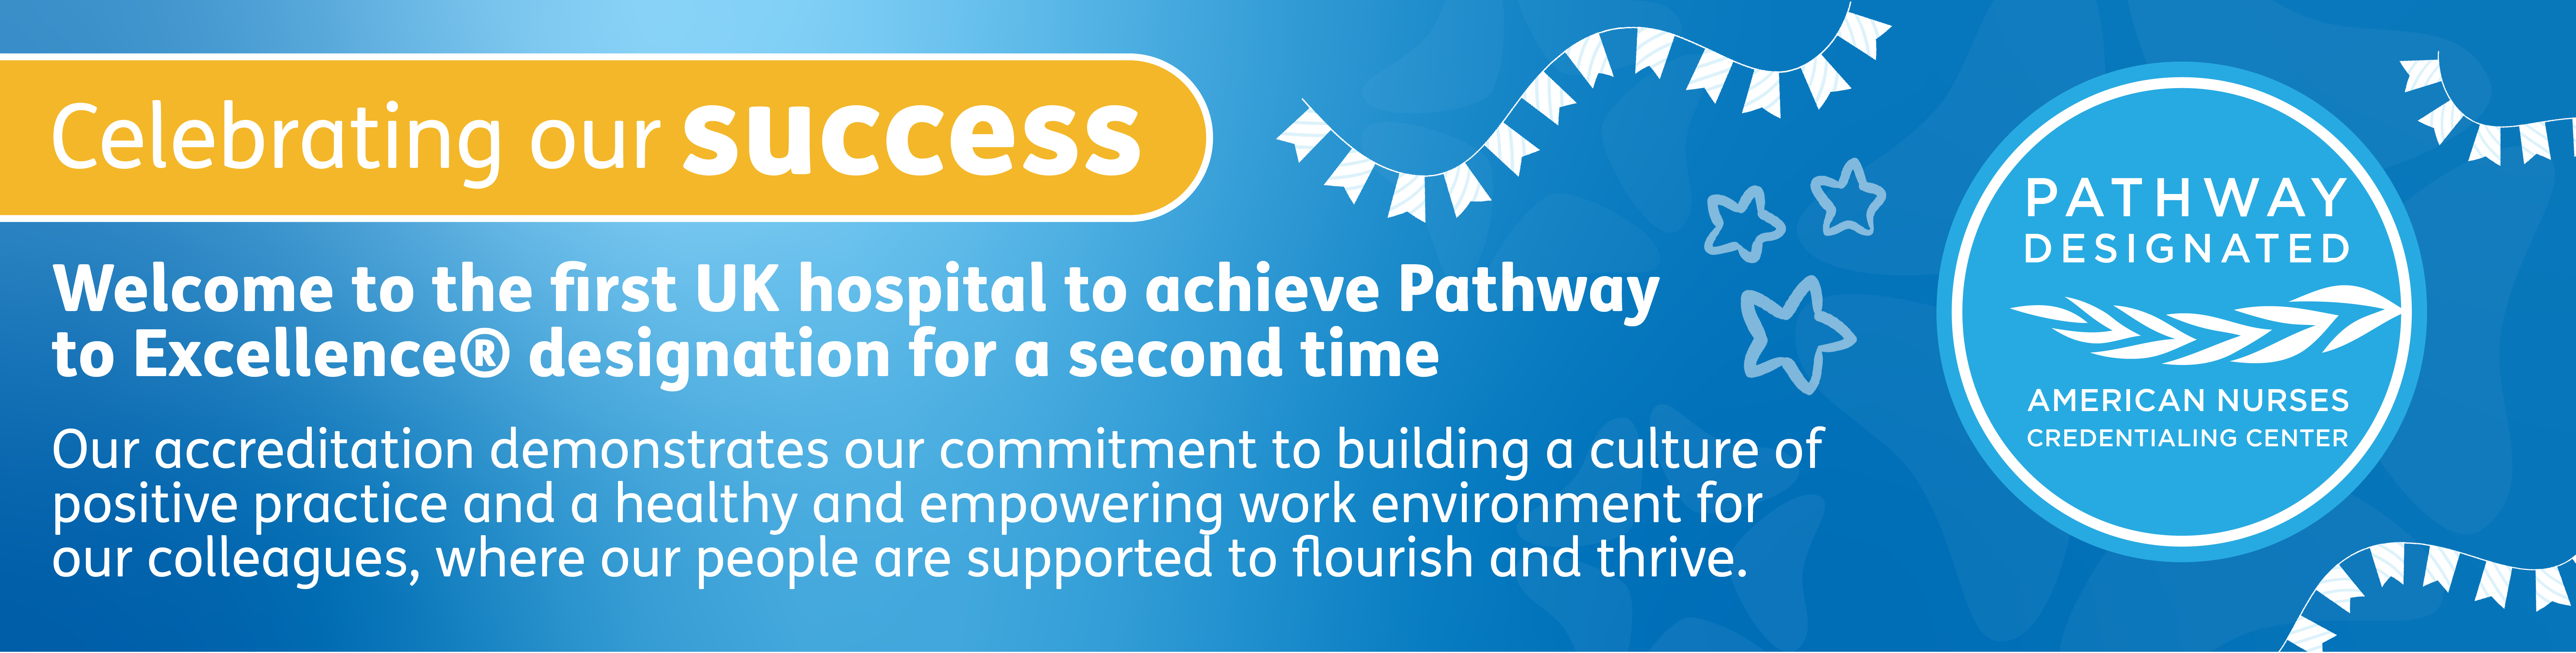 NGH - website banner - Pathway success